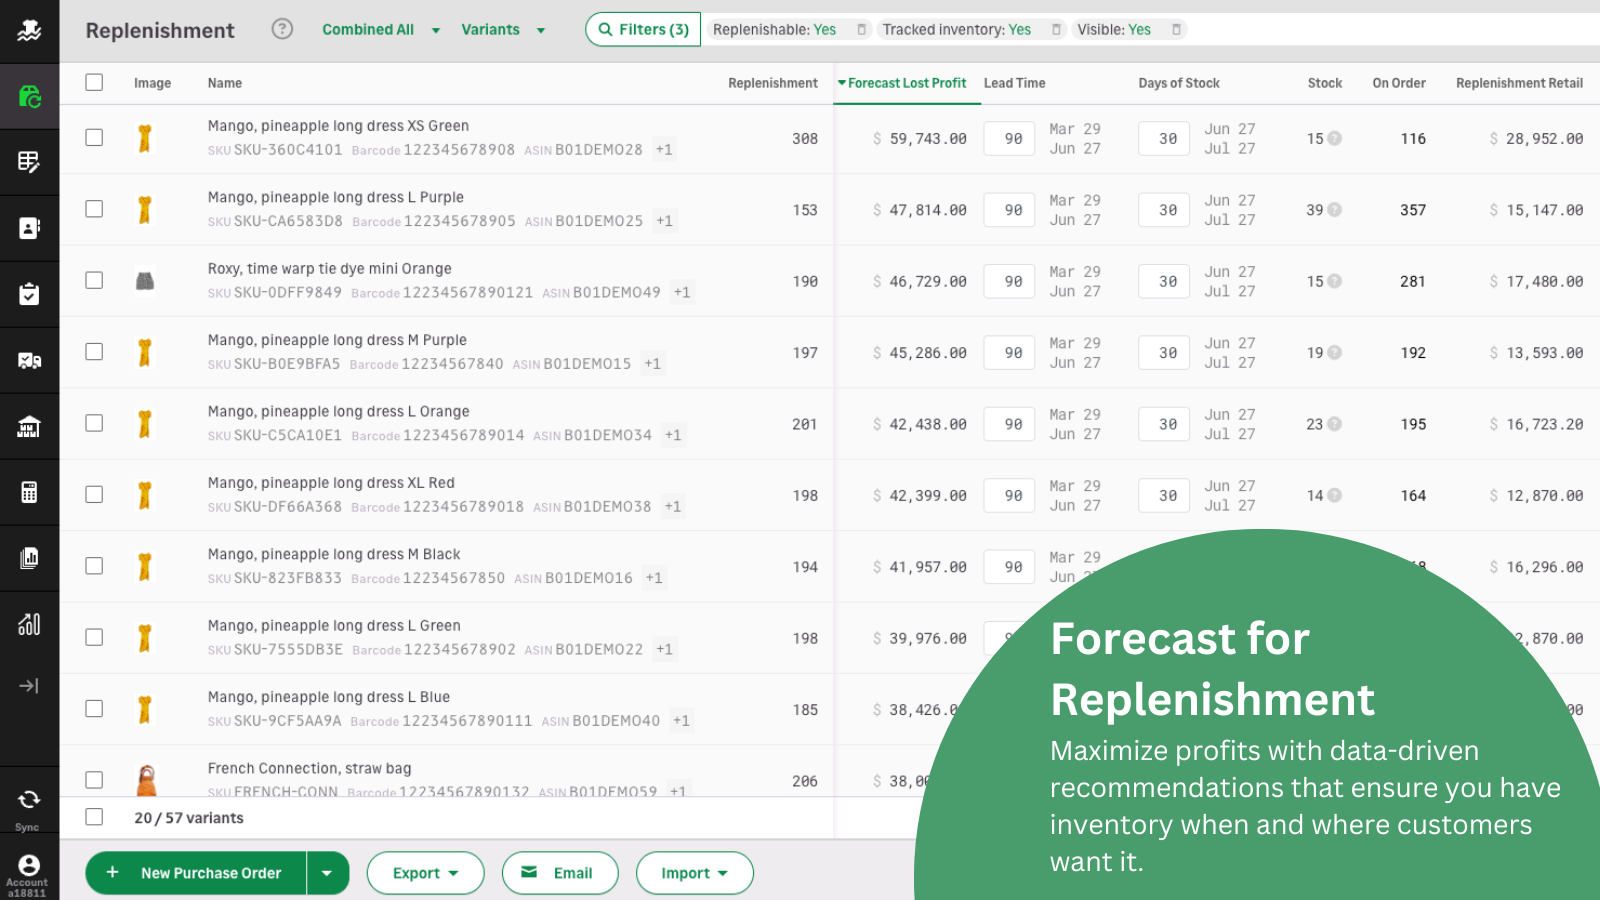 Forecast to have inventory when and where customers want it